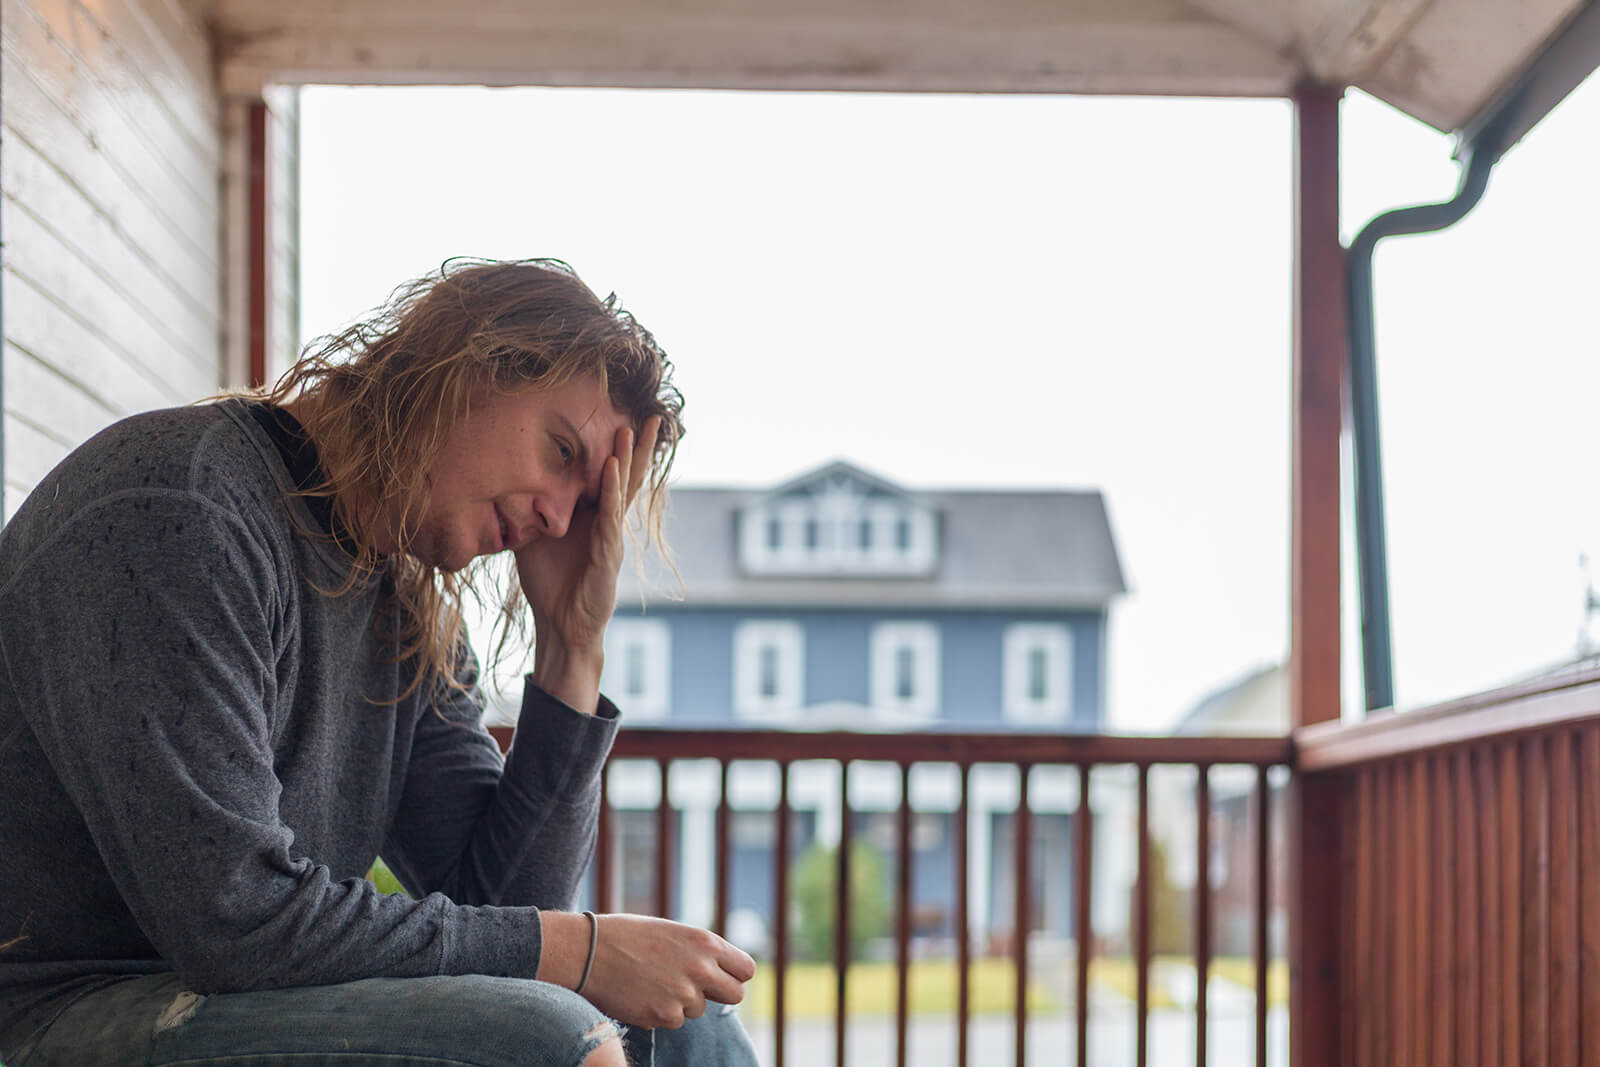 man with long hair sitting on porch displeased